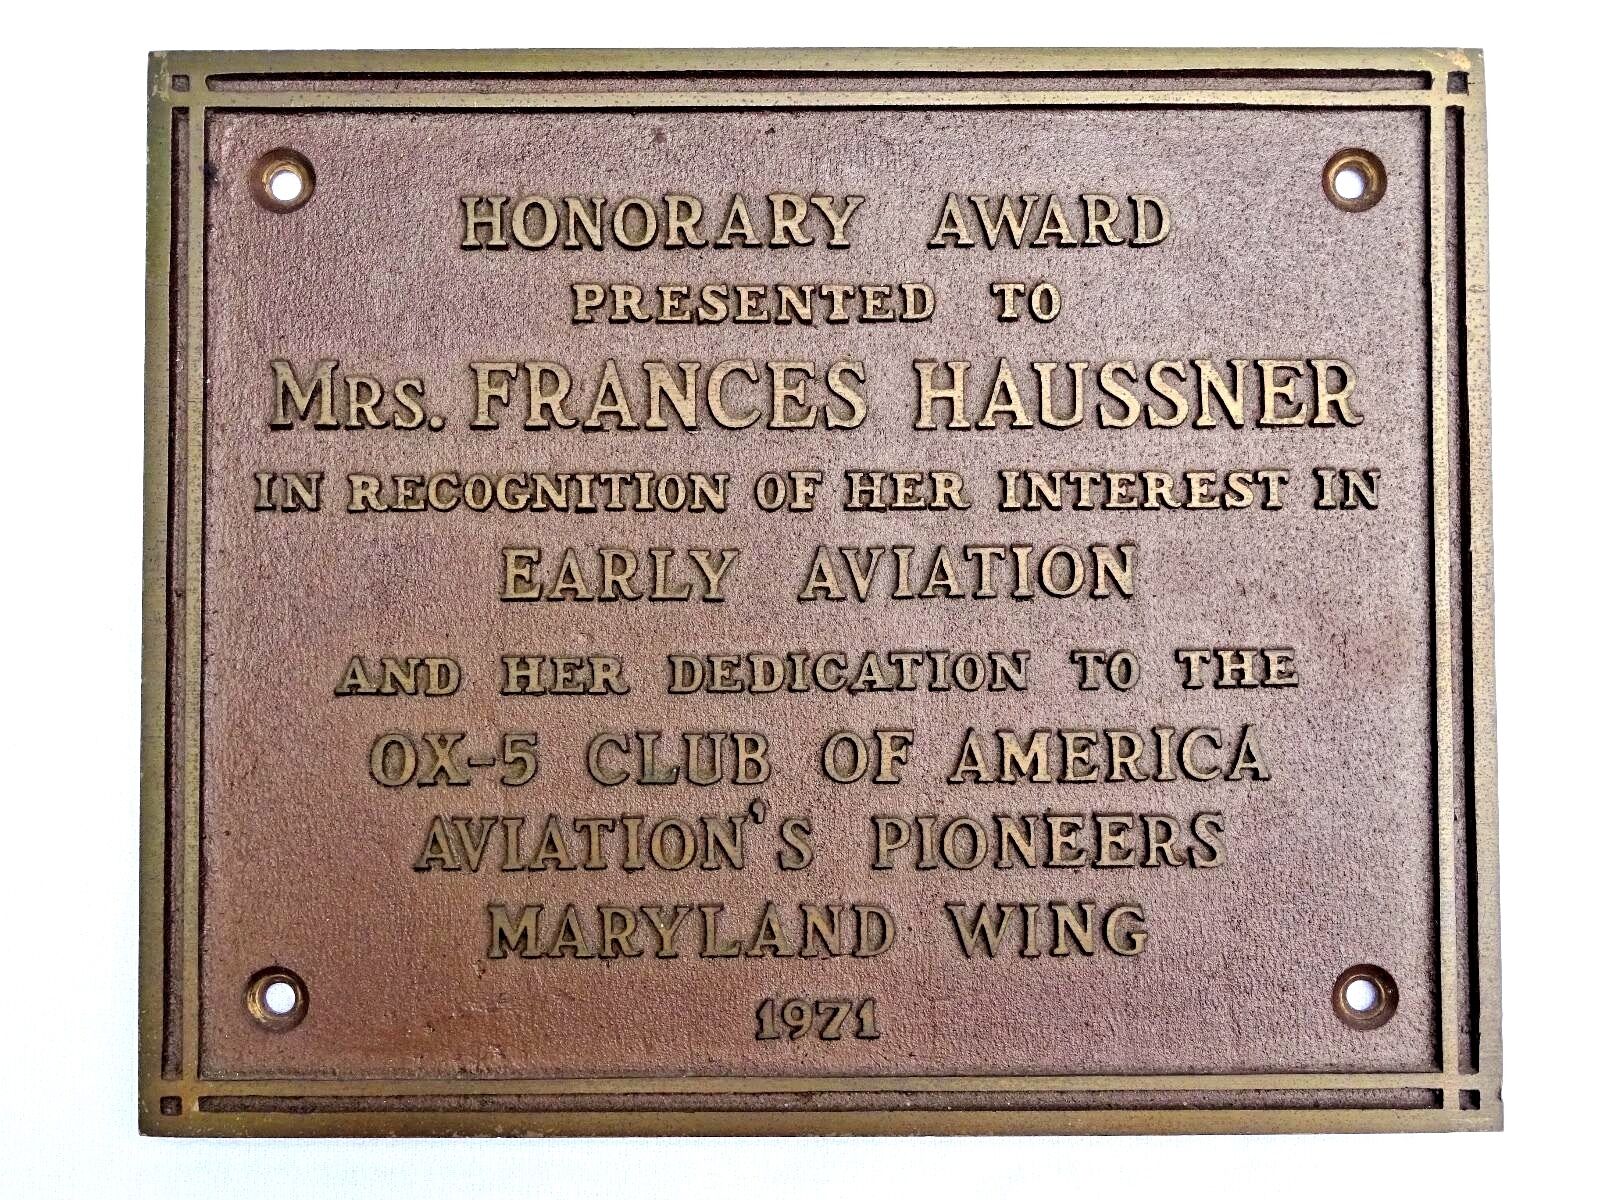 Important Historical Female Aviation Pioneer Frances Haussner BRASS PLAQUE Award